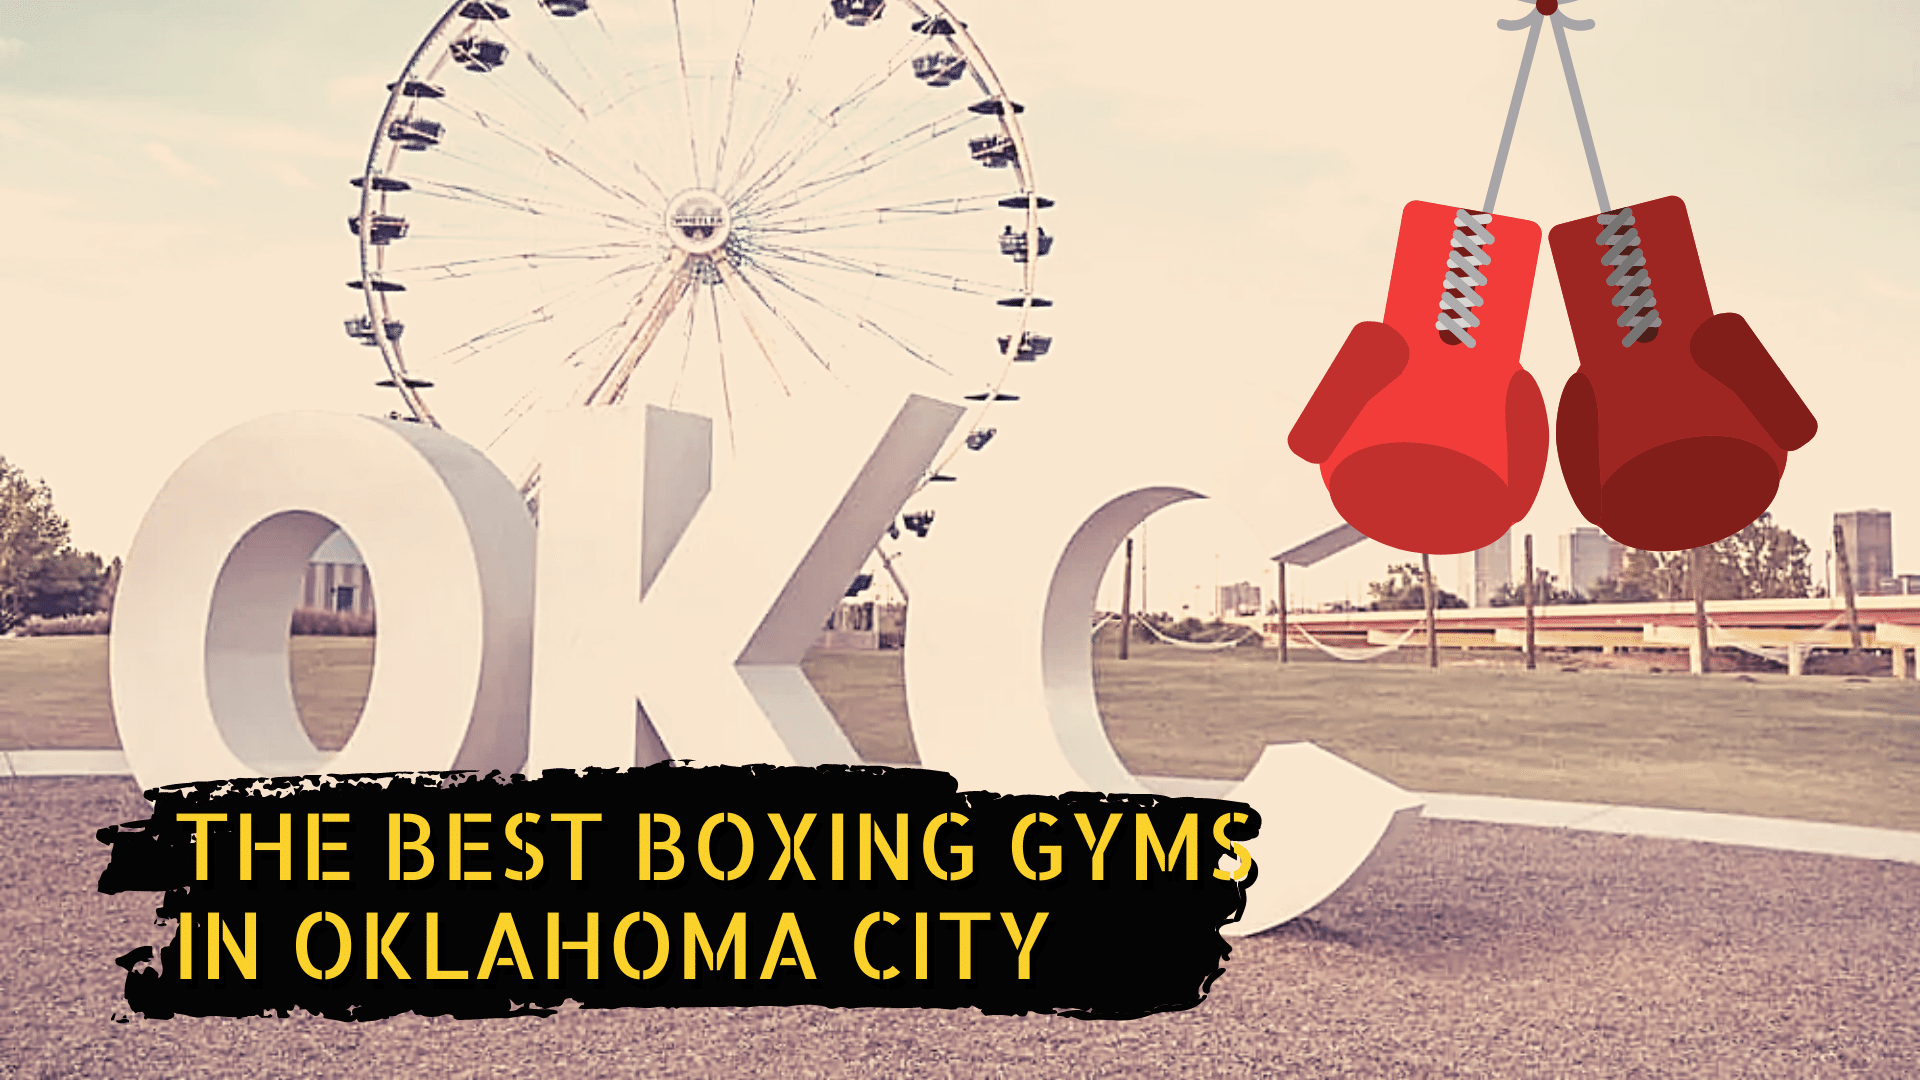 A landmark in OKC with the title The Best Boxing Gyms in Oklahoma City